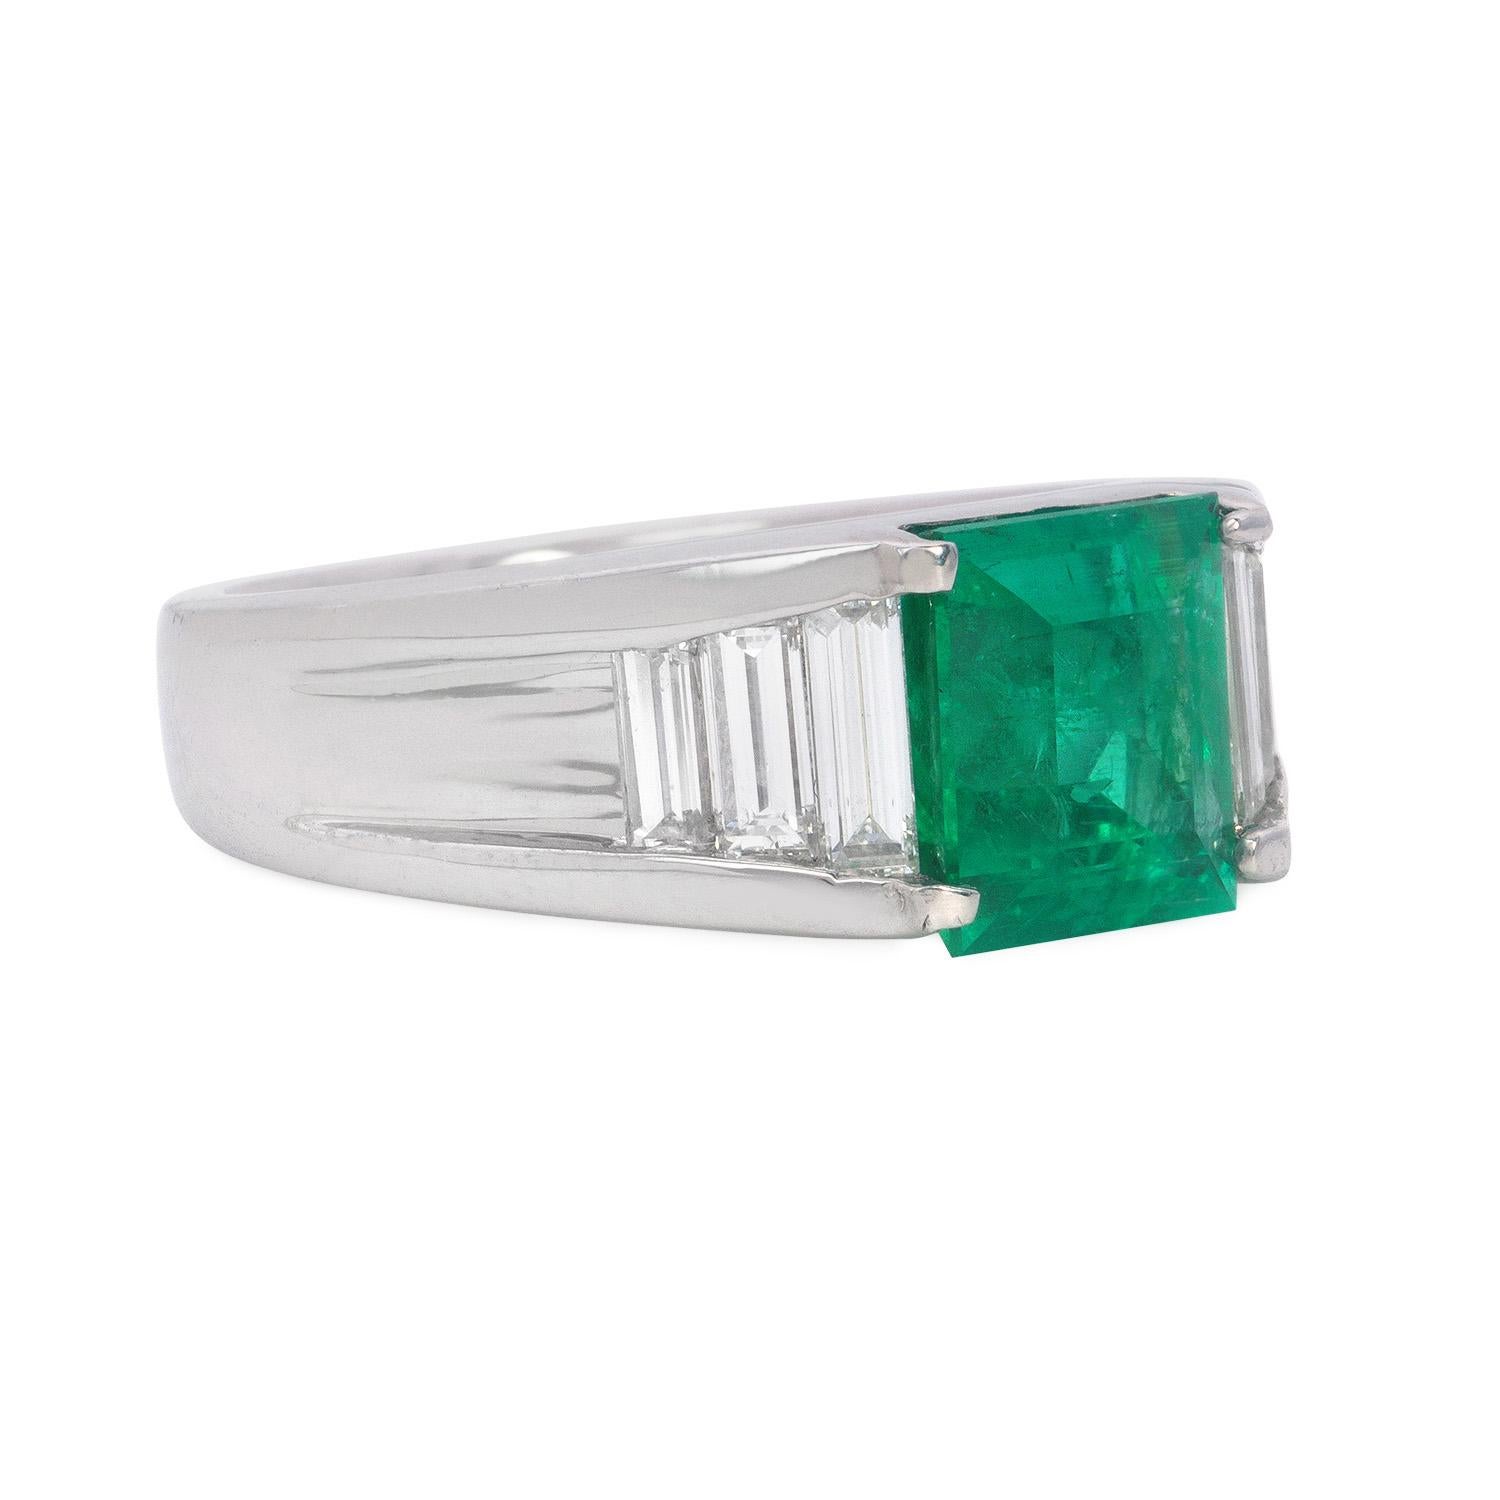 The 1.85 Carat green natural Colombian emerald with baguette diamonds is a stunning piece of jewelry. The centerpiece of the ring is a vivid green emerald, originating from Colombia, known for producing some of the world's finest emeralds. The